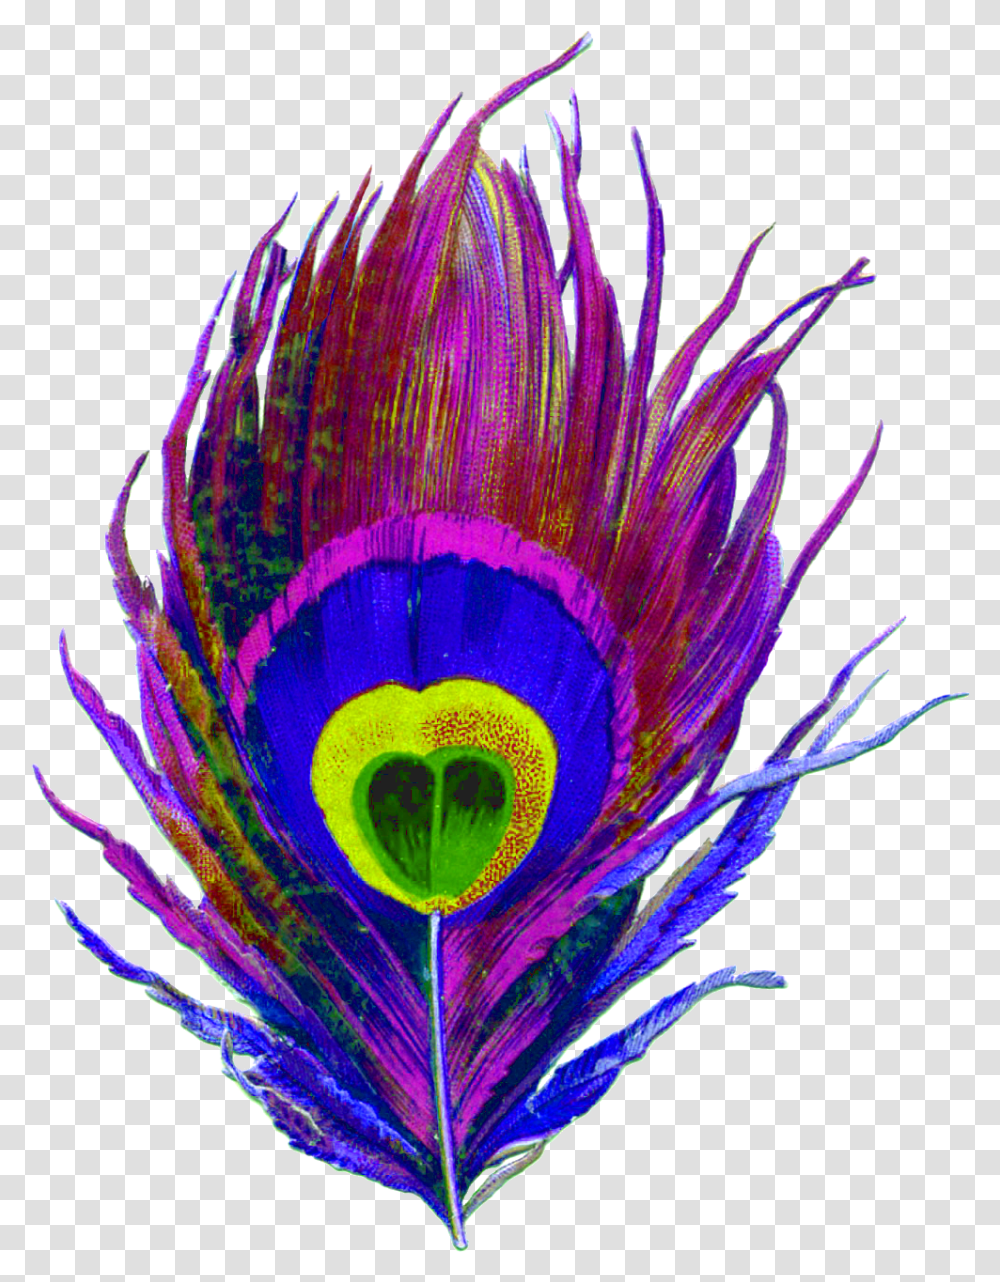 Download Peacock Feather Free Image And Clipart Colorful Peacock Feather, Animal, Bird, Plant, Pattern Transparent Png